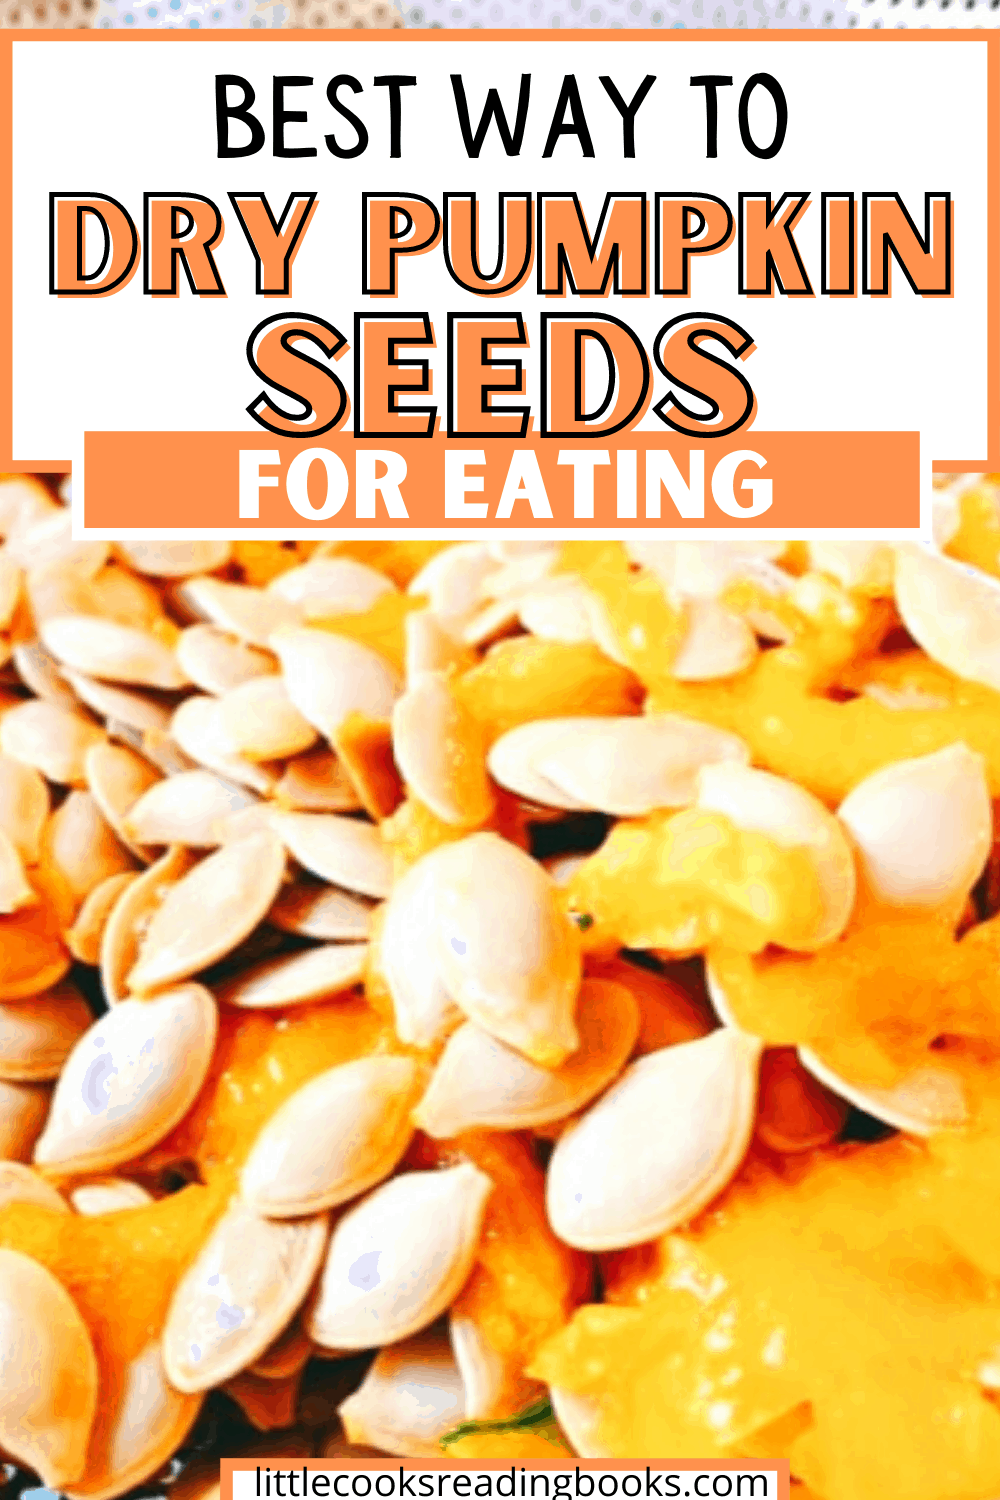 How To Dry Pumpkin Seeds to Eat For Roasting